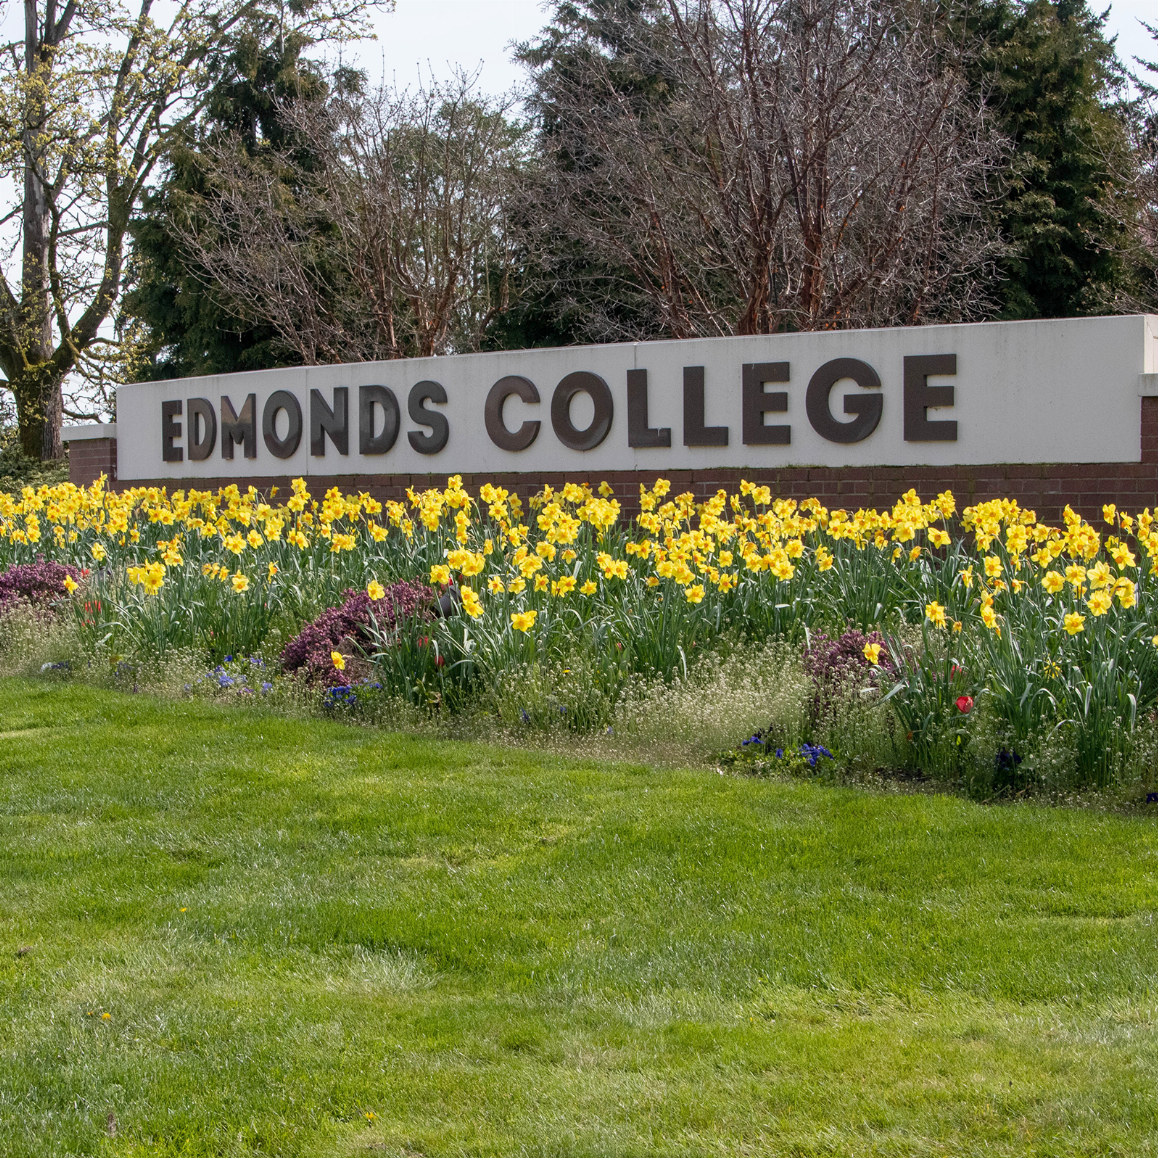 Classes for the dental assistant program at Edmonds College will be held in the evening. (Photo Credit: Arutyun Sargsyan)